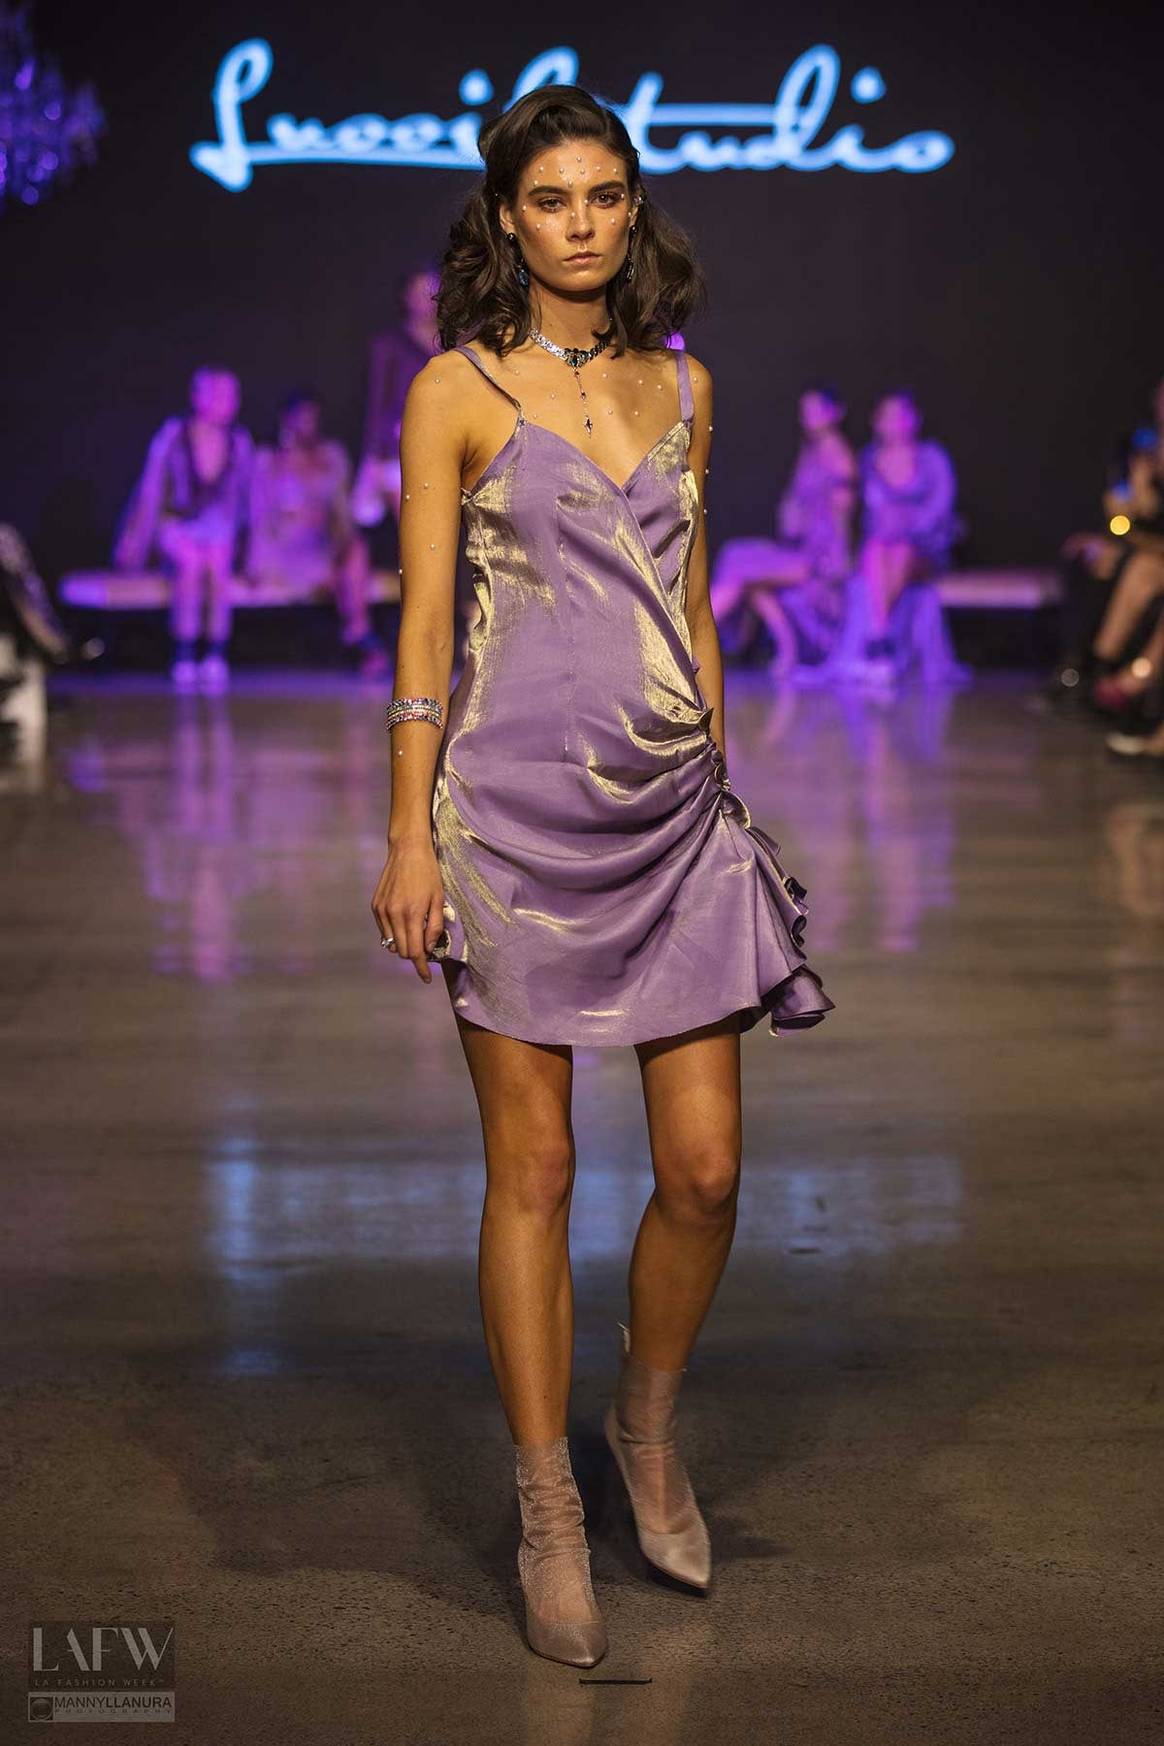 LAFW SS20: Luooifstudio in pictures